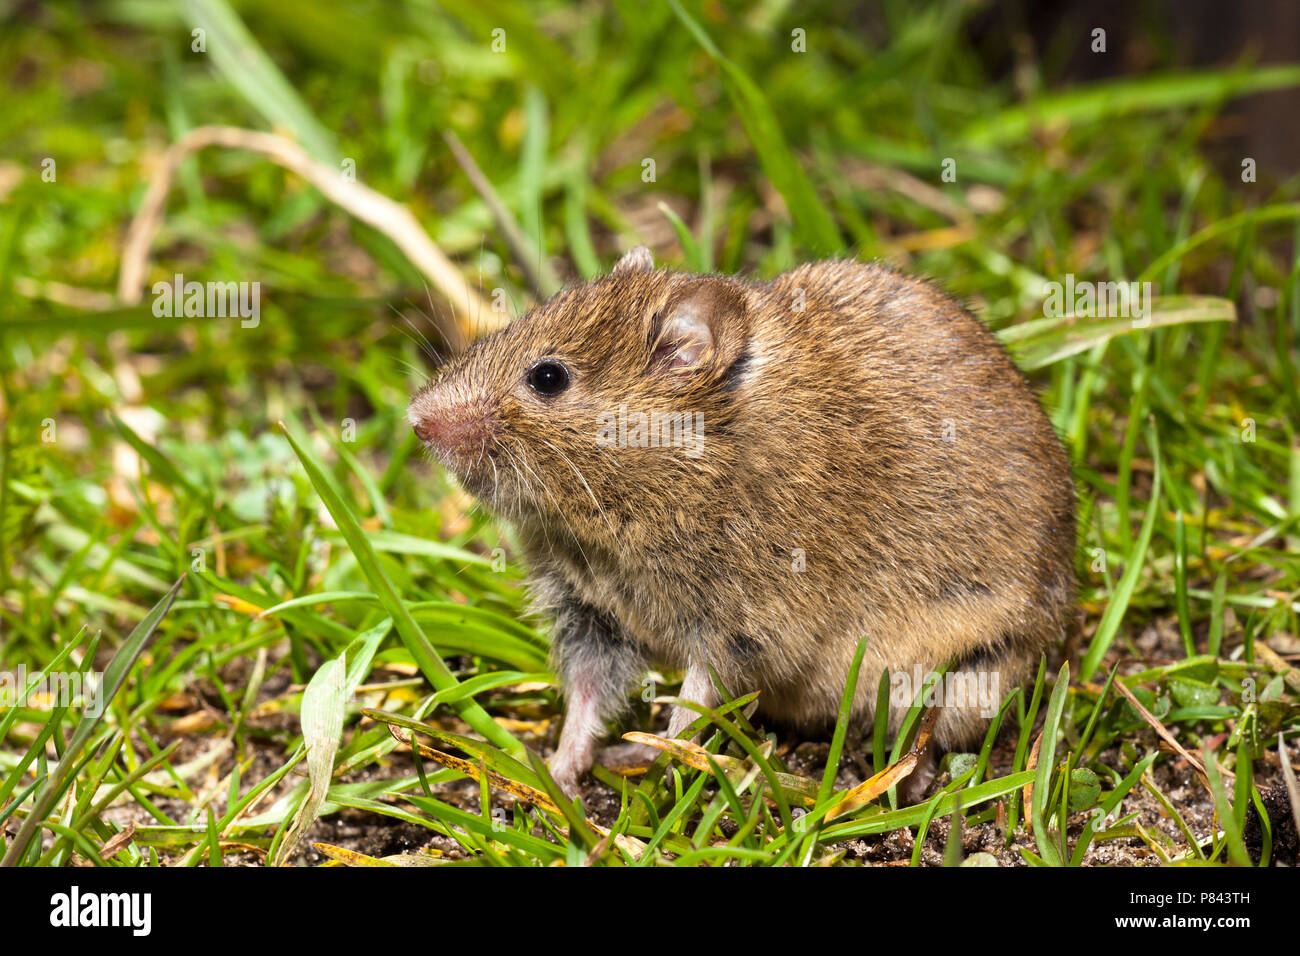 Foeragerende Veldmuis; Foraging Common Vole Stock Photo